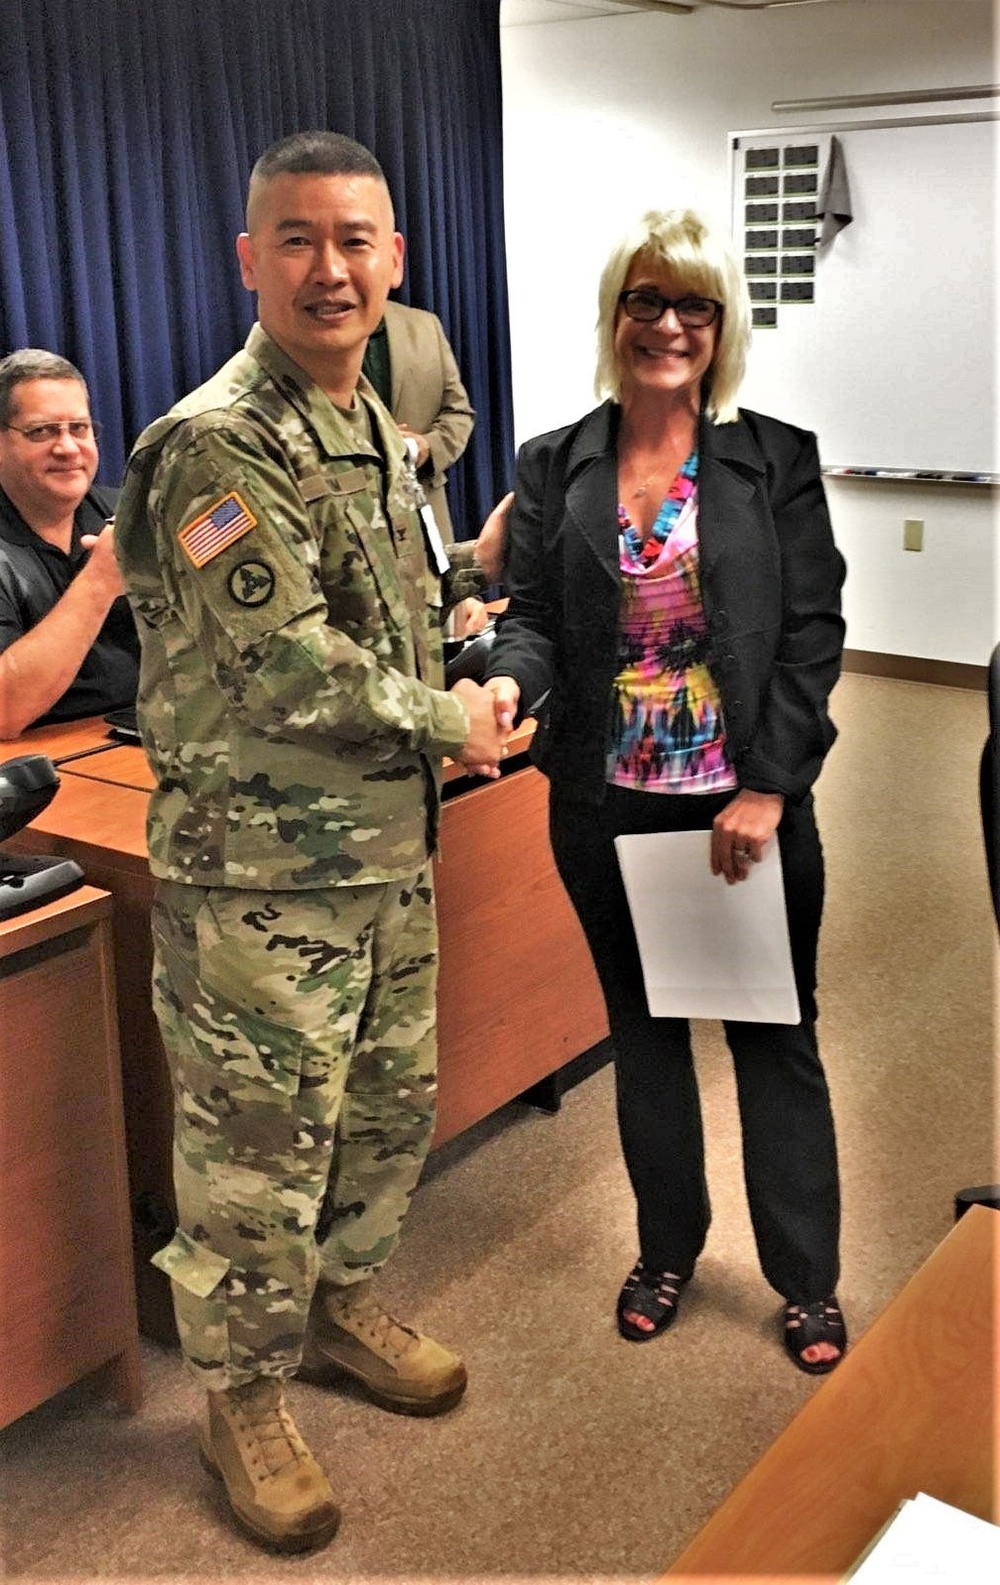 Trudy Ward awarded Fort McCoy Civilian Employee of the Month for August 2019